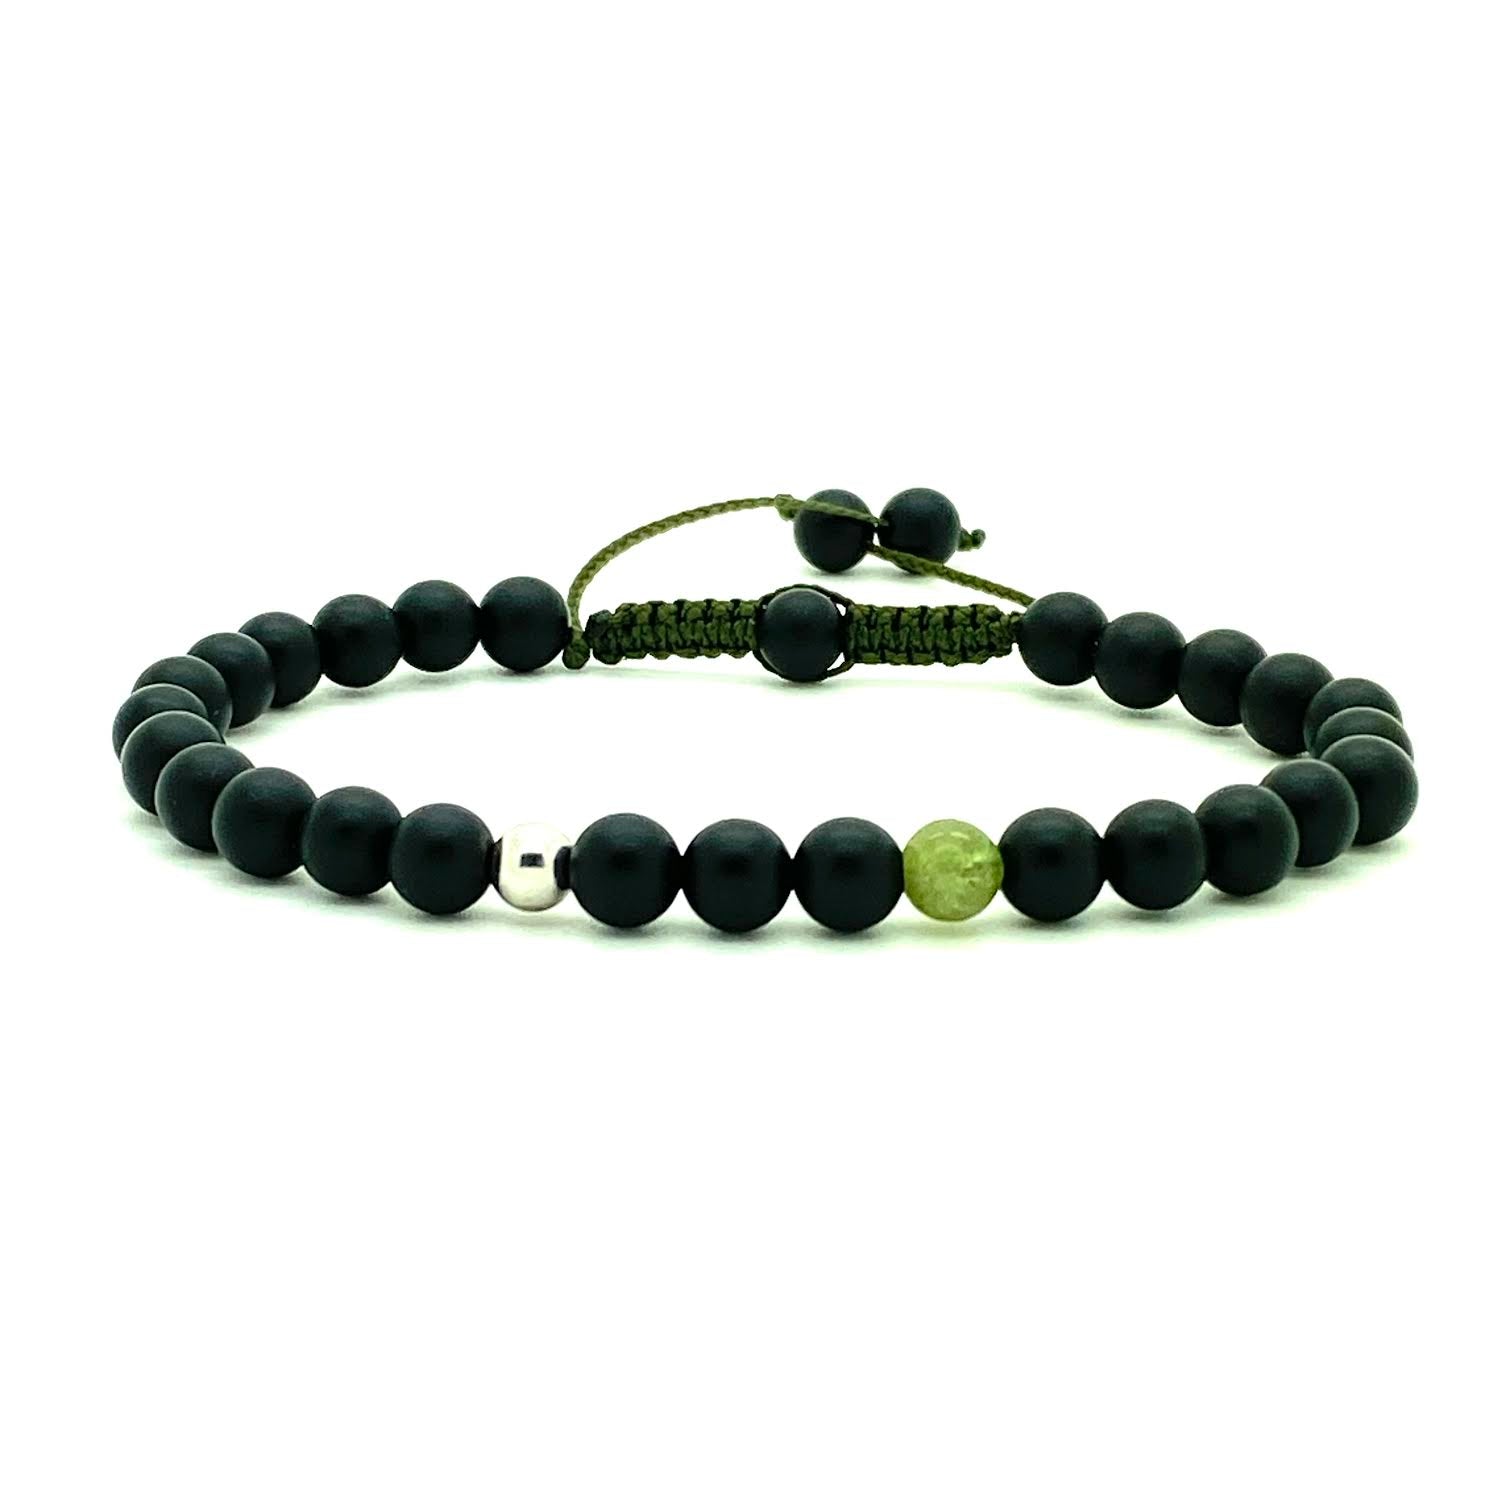 Trendy black matte onyx beads accented with a single green garnet bead, and your choice of a 14K solid white, rose or yellow gold bead. Hand knotted adjustable cord for a perfect fit.  Made by WristBend